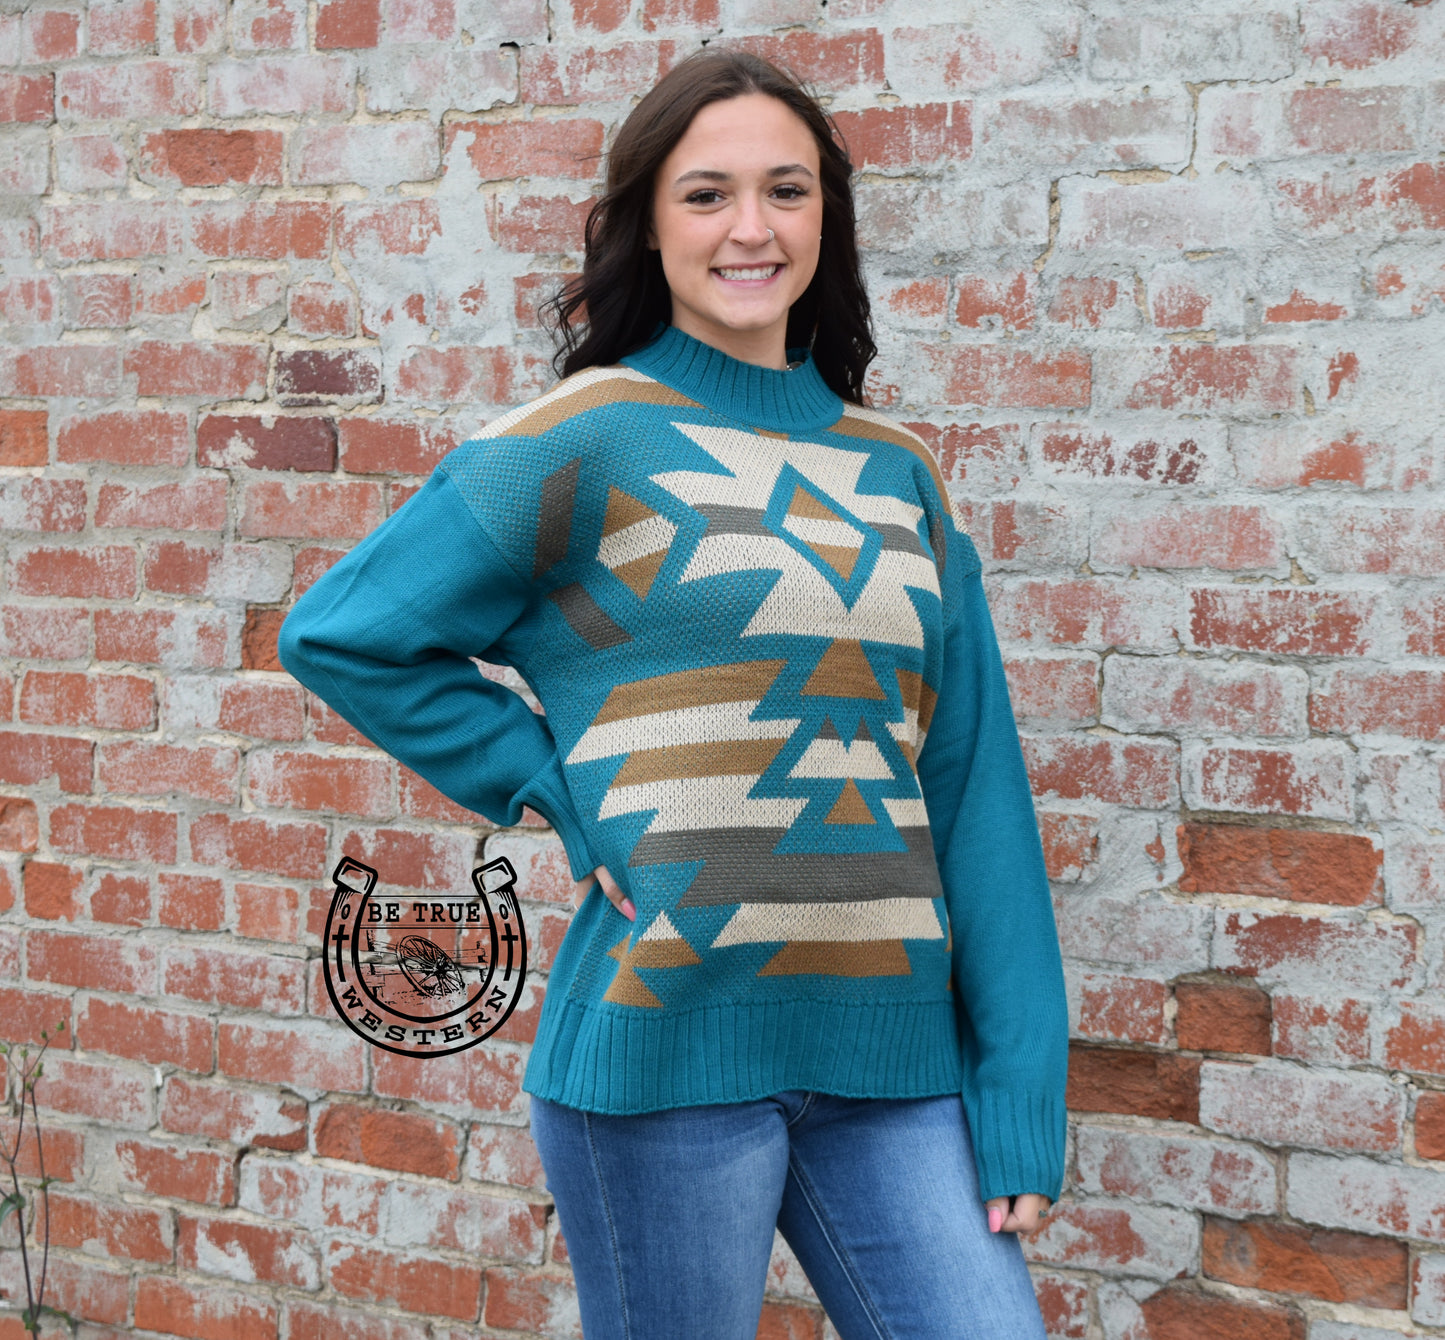 The Chic Aztec High Neck Sweater